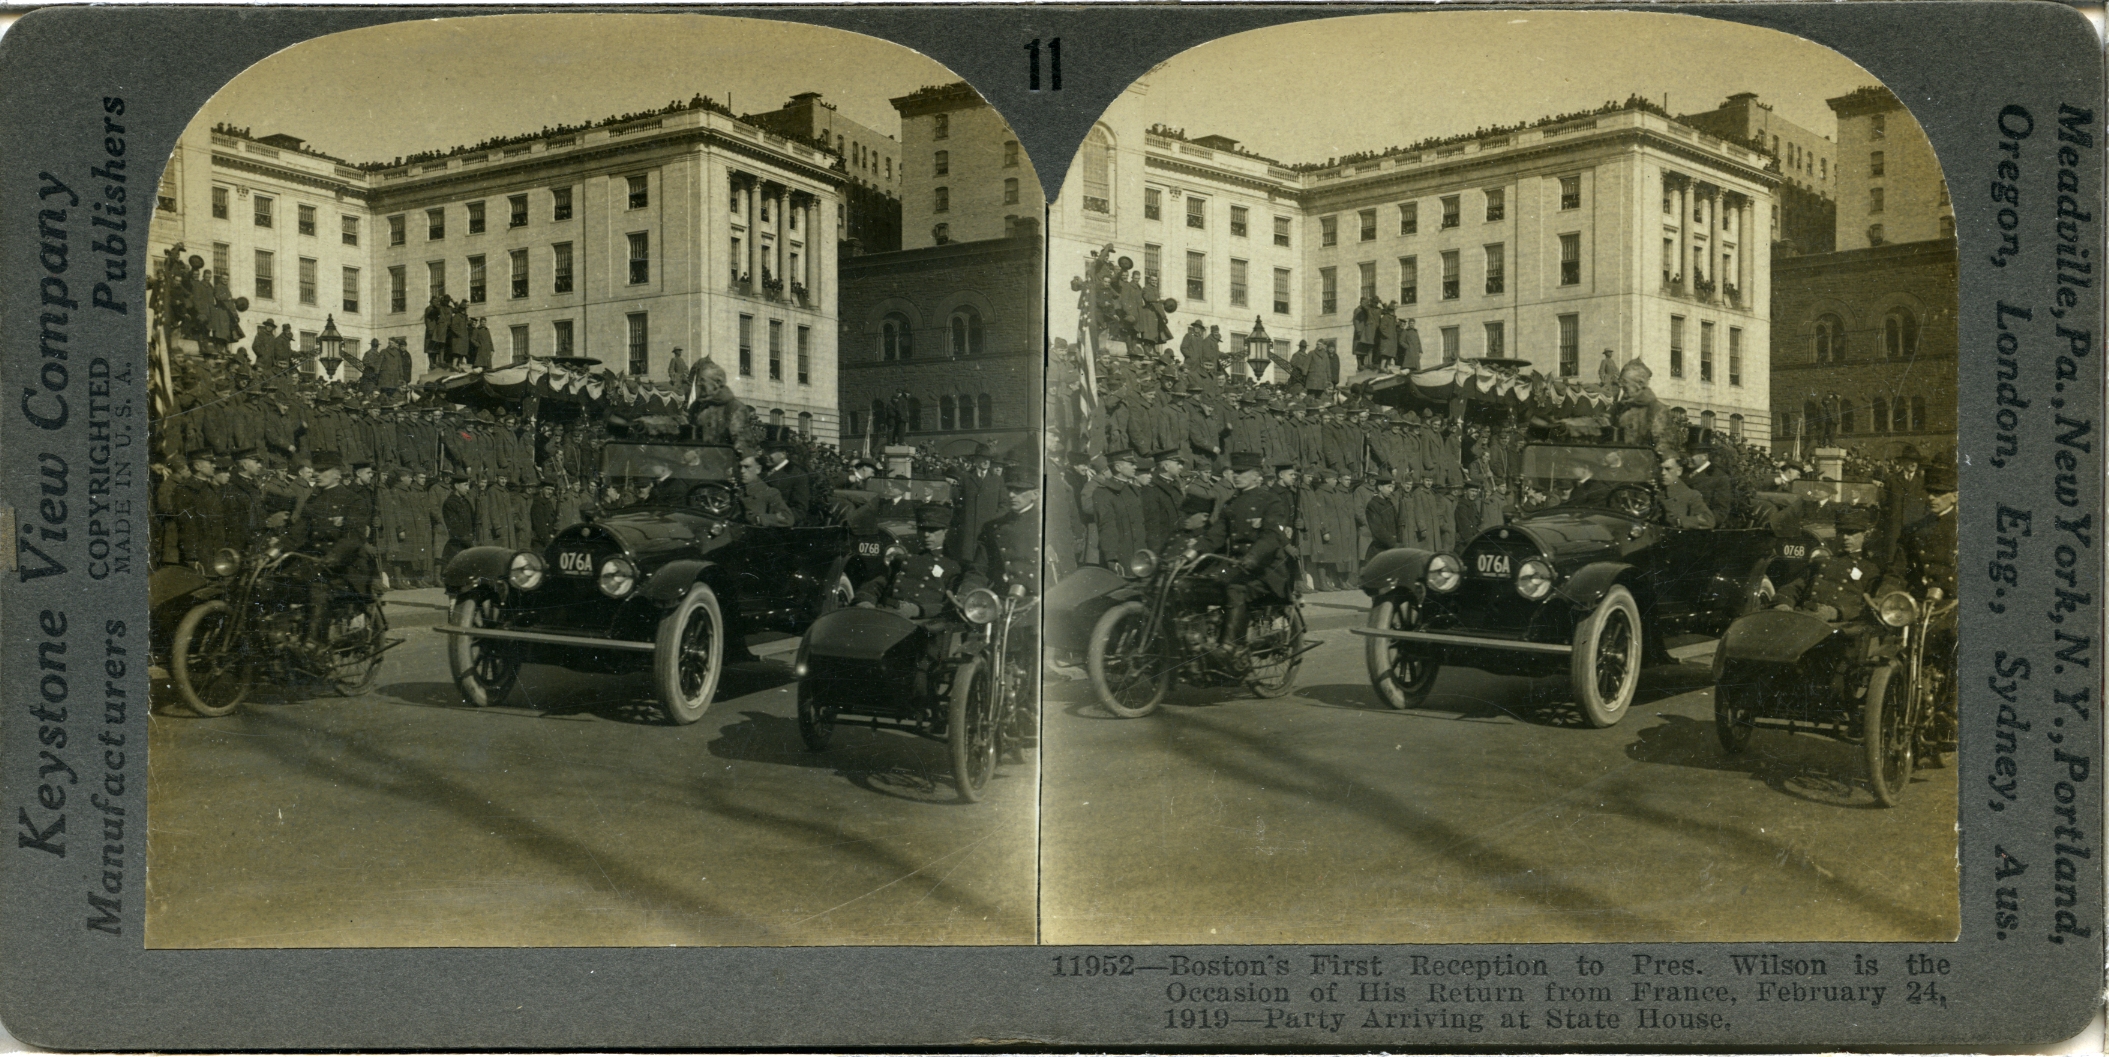 Boston's First Reception to Pres. Wilson is the Occasion of His Return from France, February 24, 1919